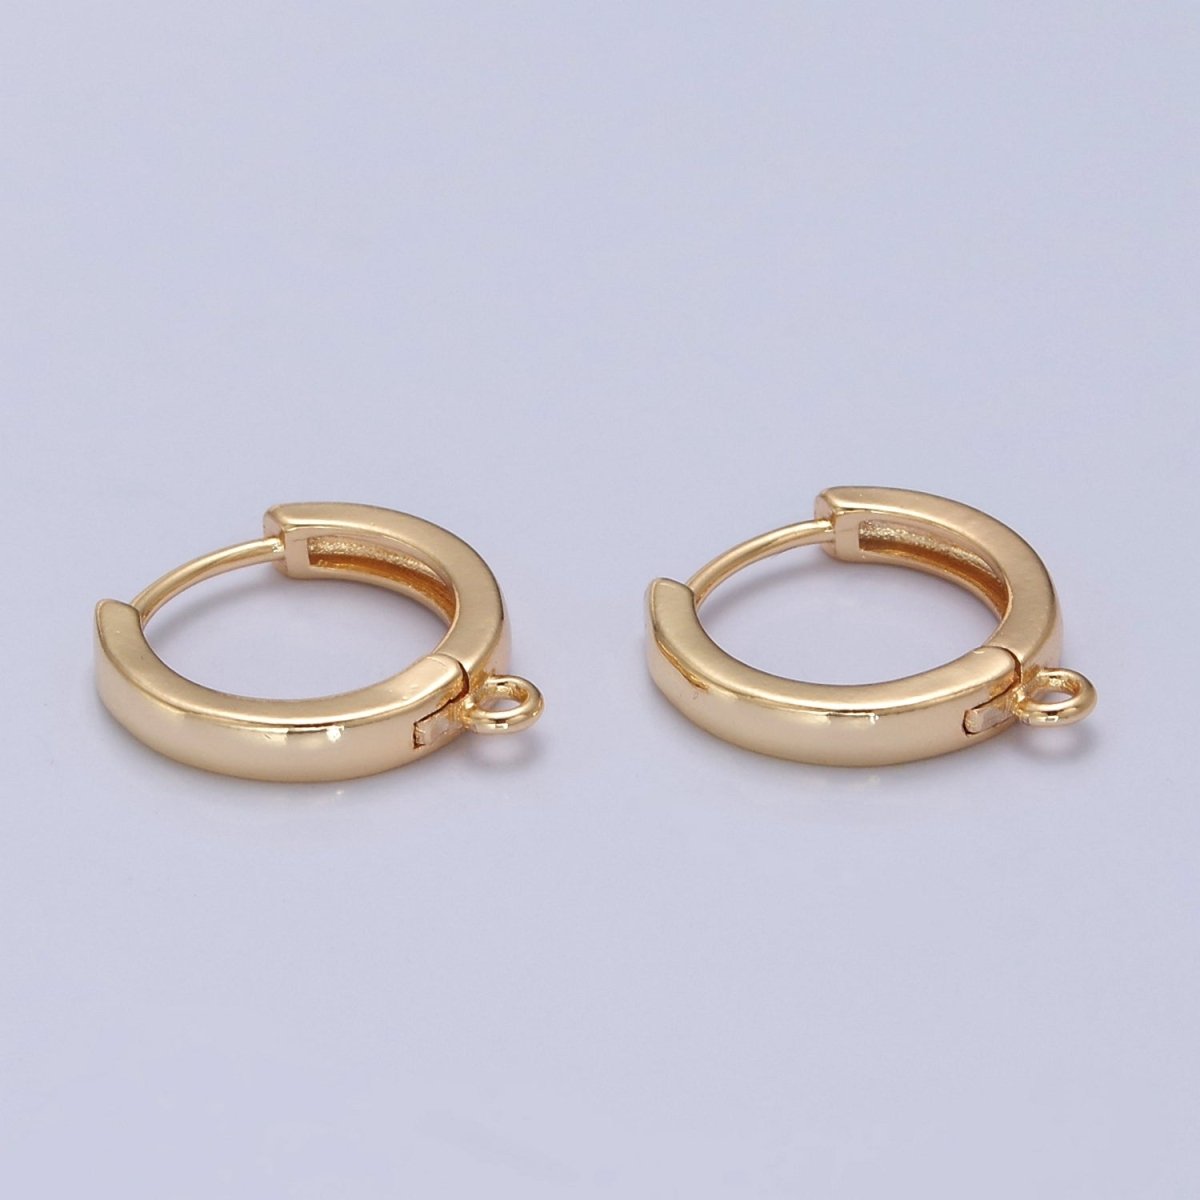 Gold Filled Earring Hoops Lever Back one touch w/ open link Lever Hoop earring Nickel free Lead Free for Earring Charm Making Findings L-675 - DLUXCA